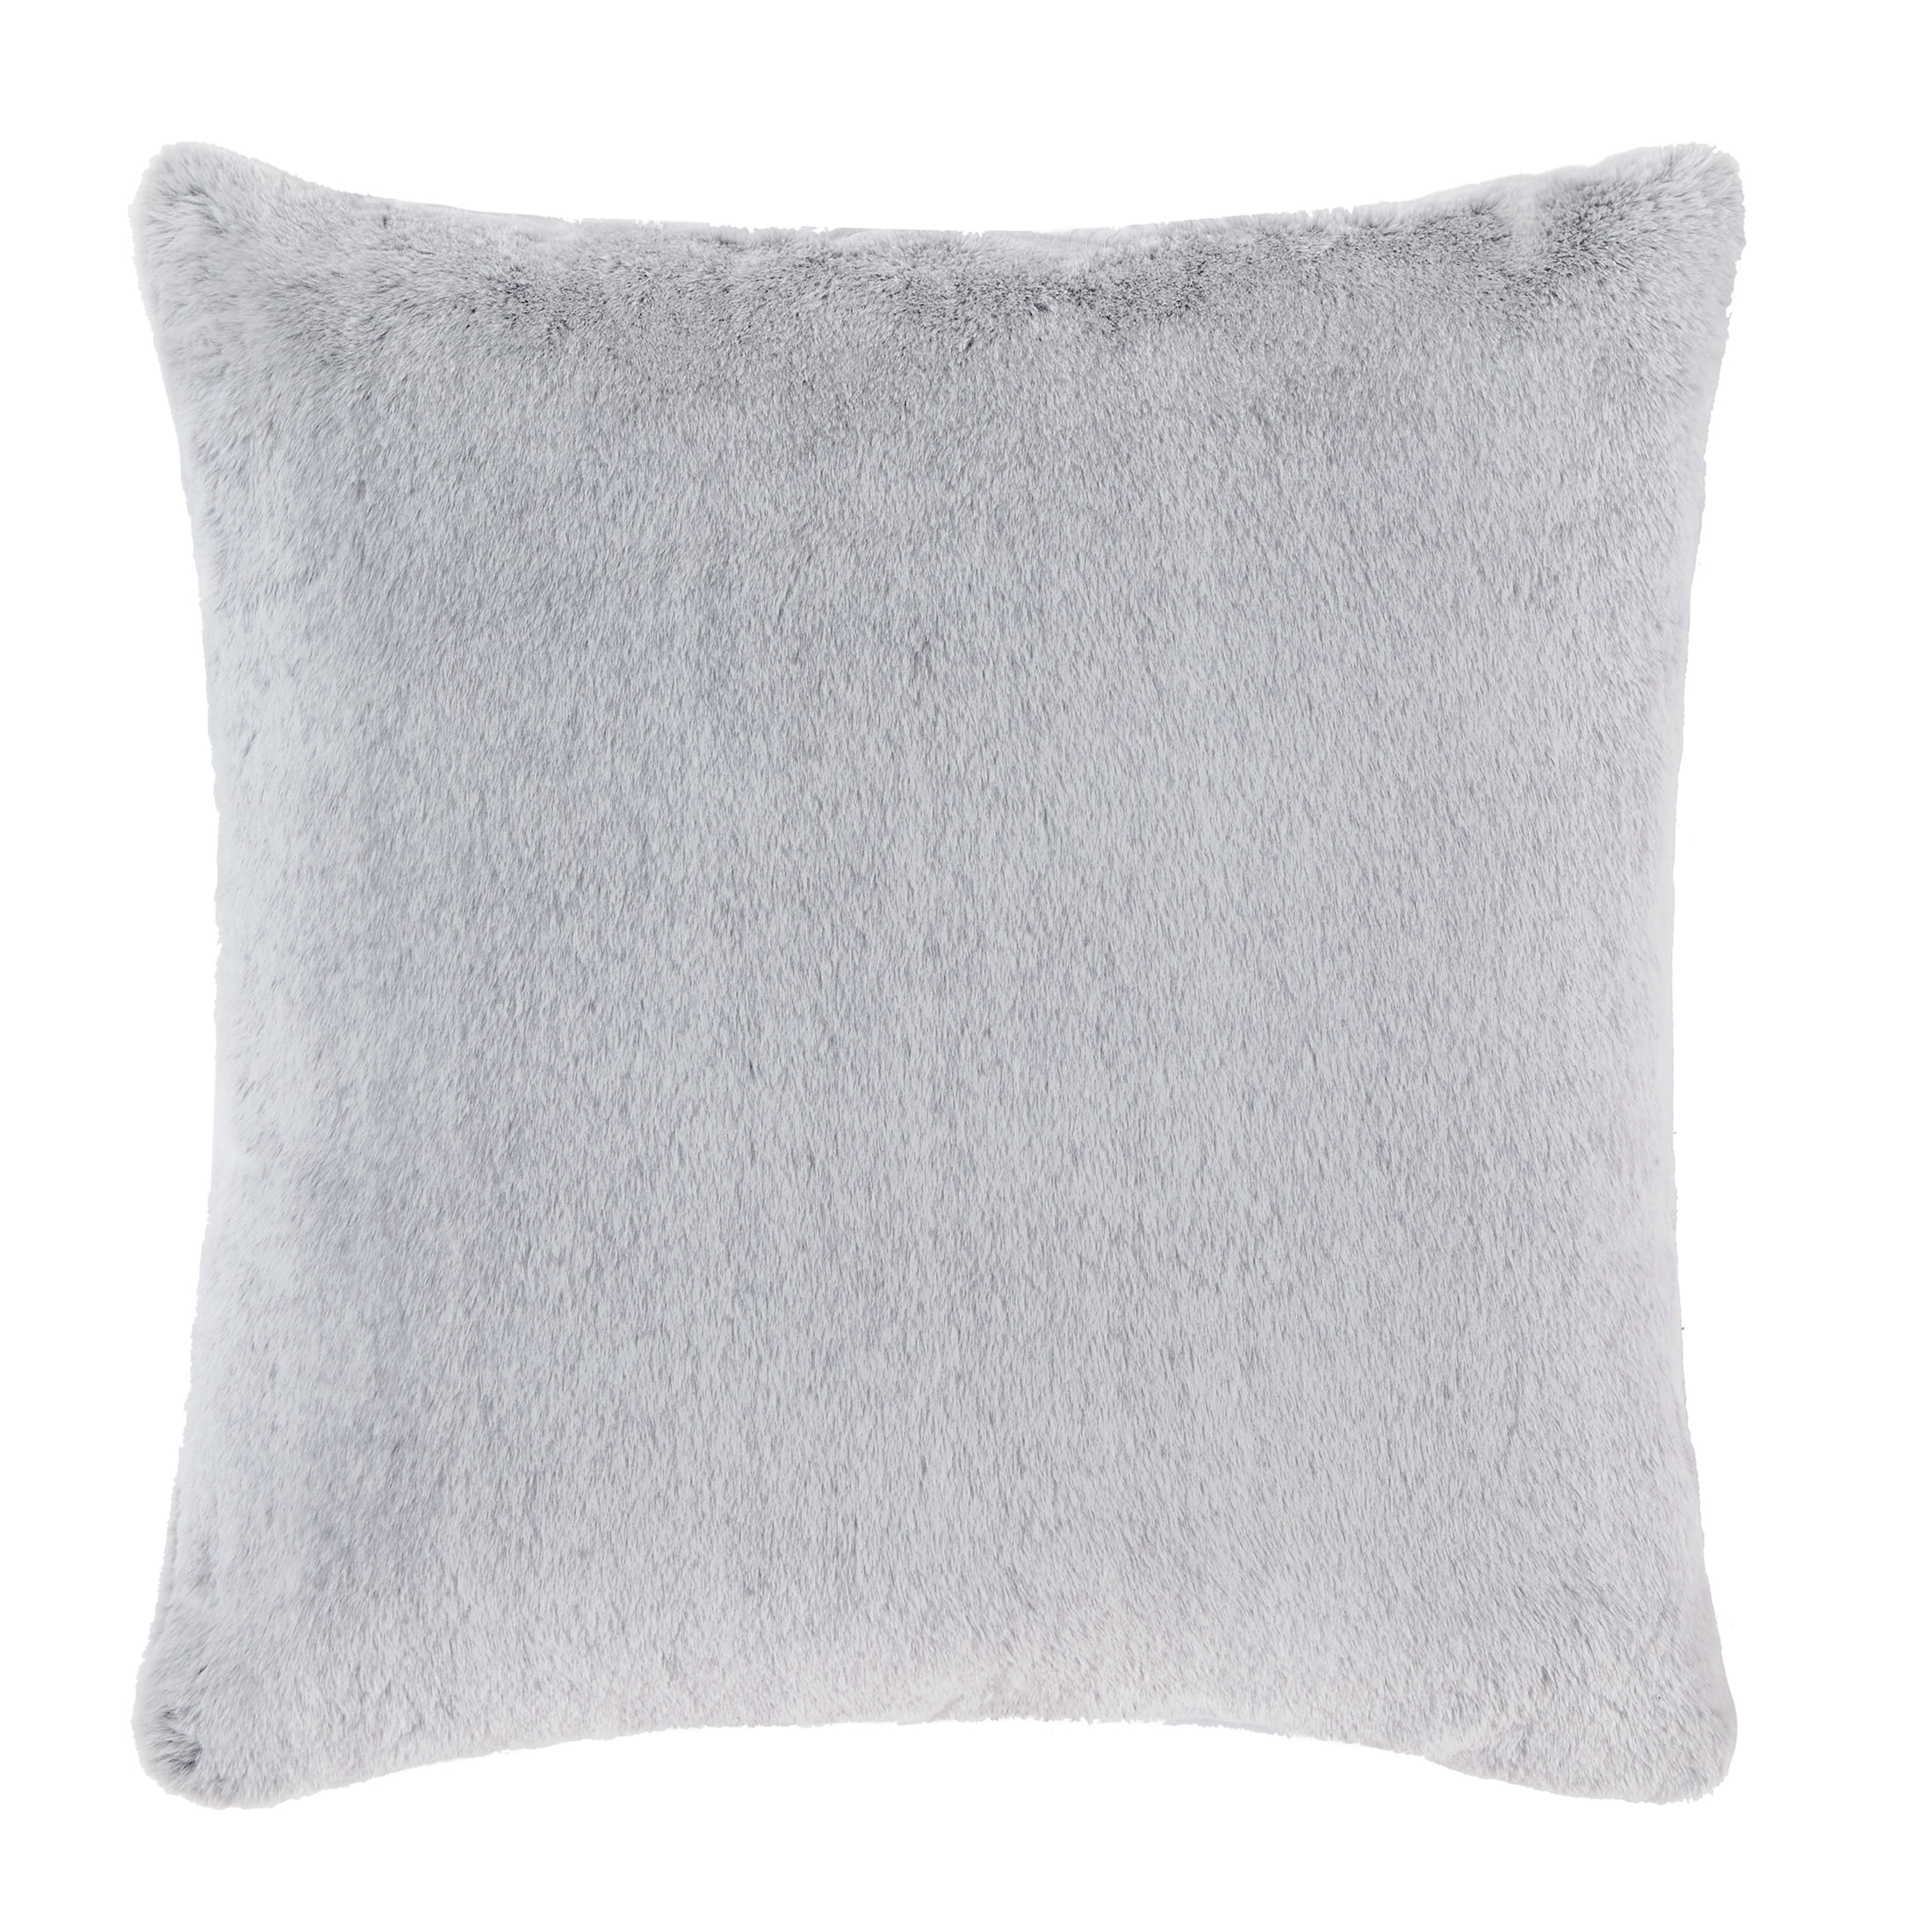 Better Homes & Gardens 20" x 20" Grey Tipped Faux Fur Decorative Pillow